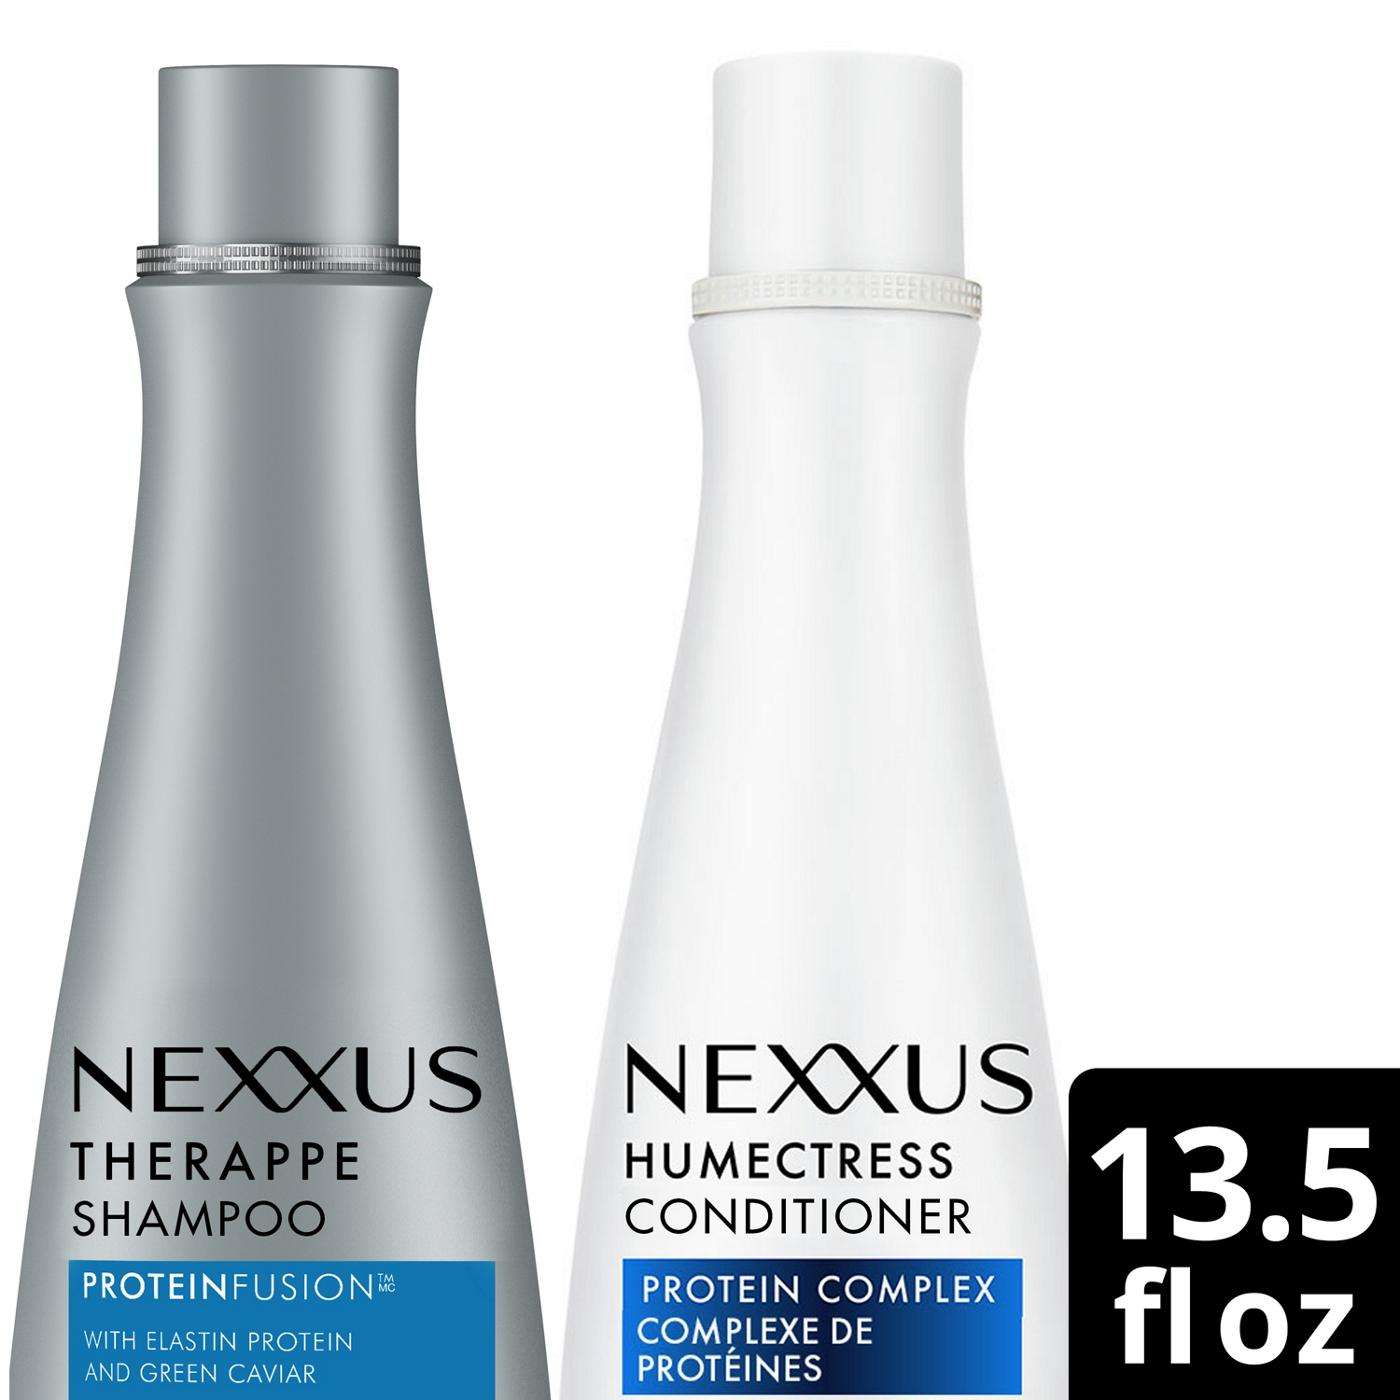 Nexxus Therappe Shampoo & Conditioner Humectress Combo; image 8 of 8